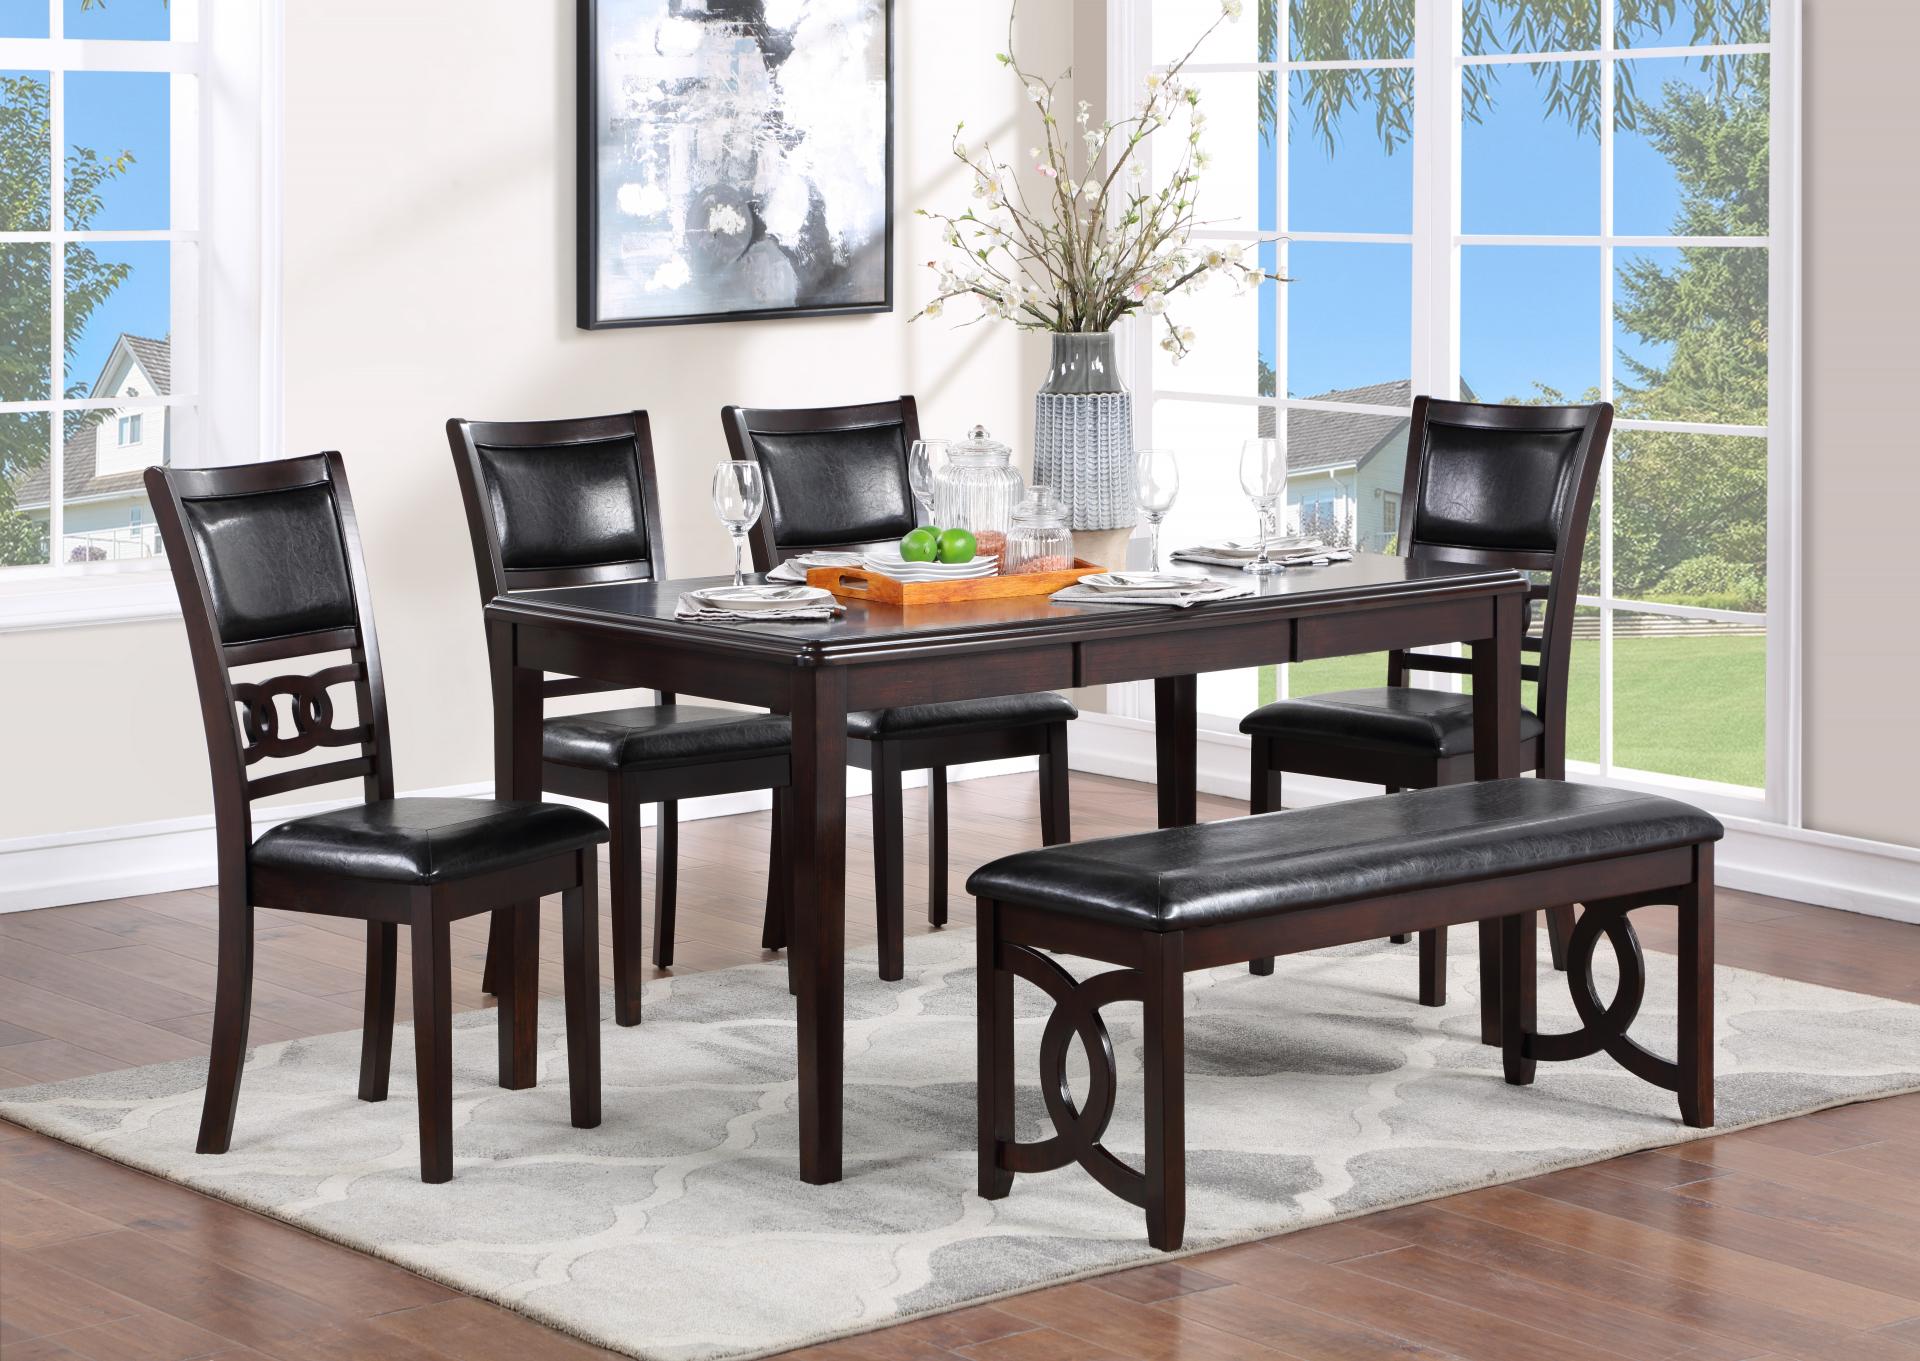 Ebony Dark Espresso Dining Table with 4 chairs and a backless bench and padded seats